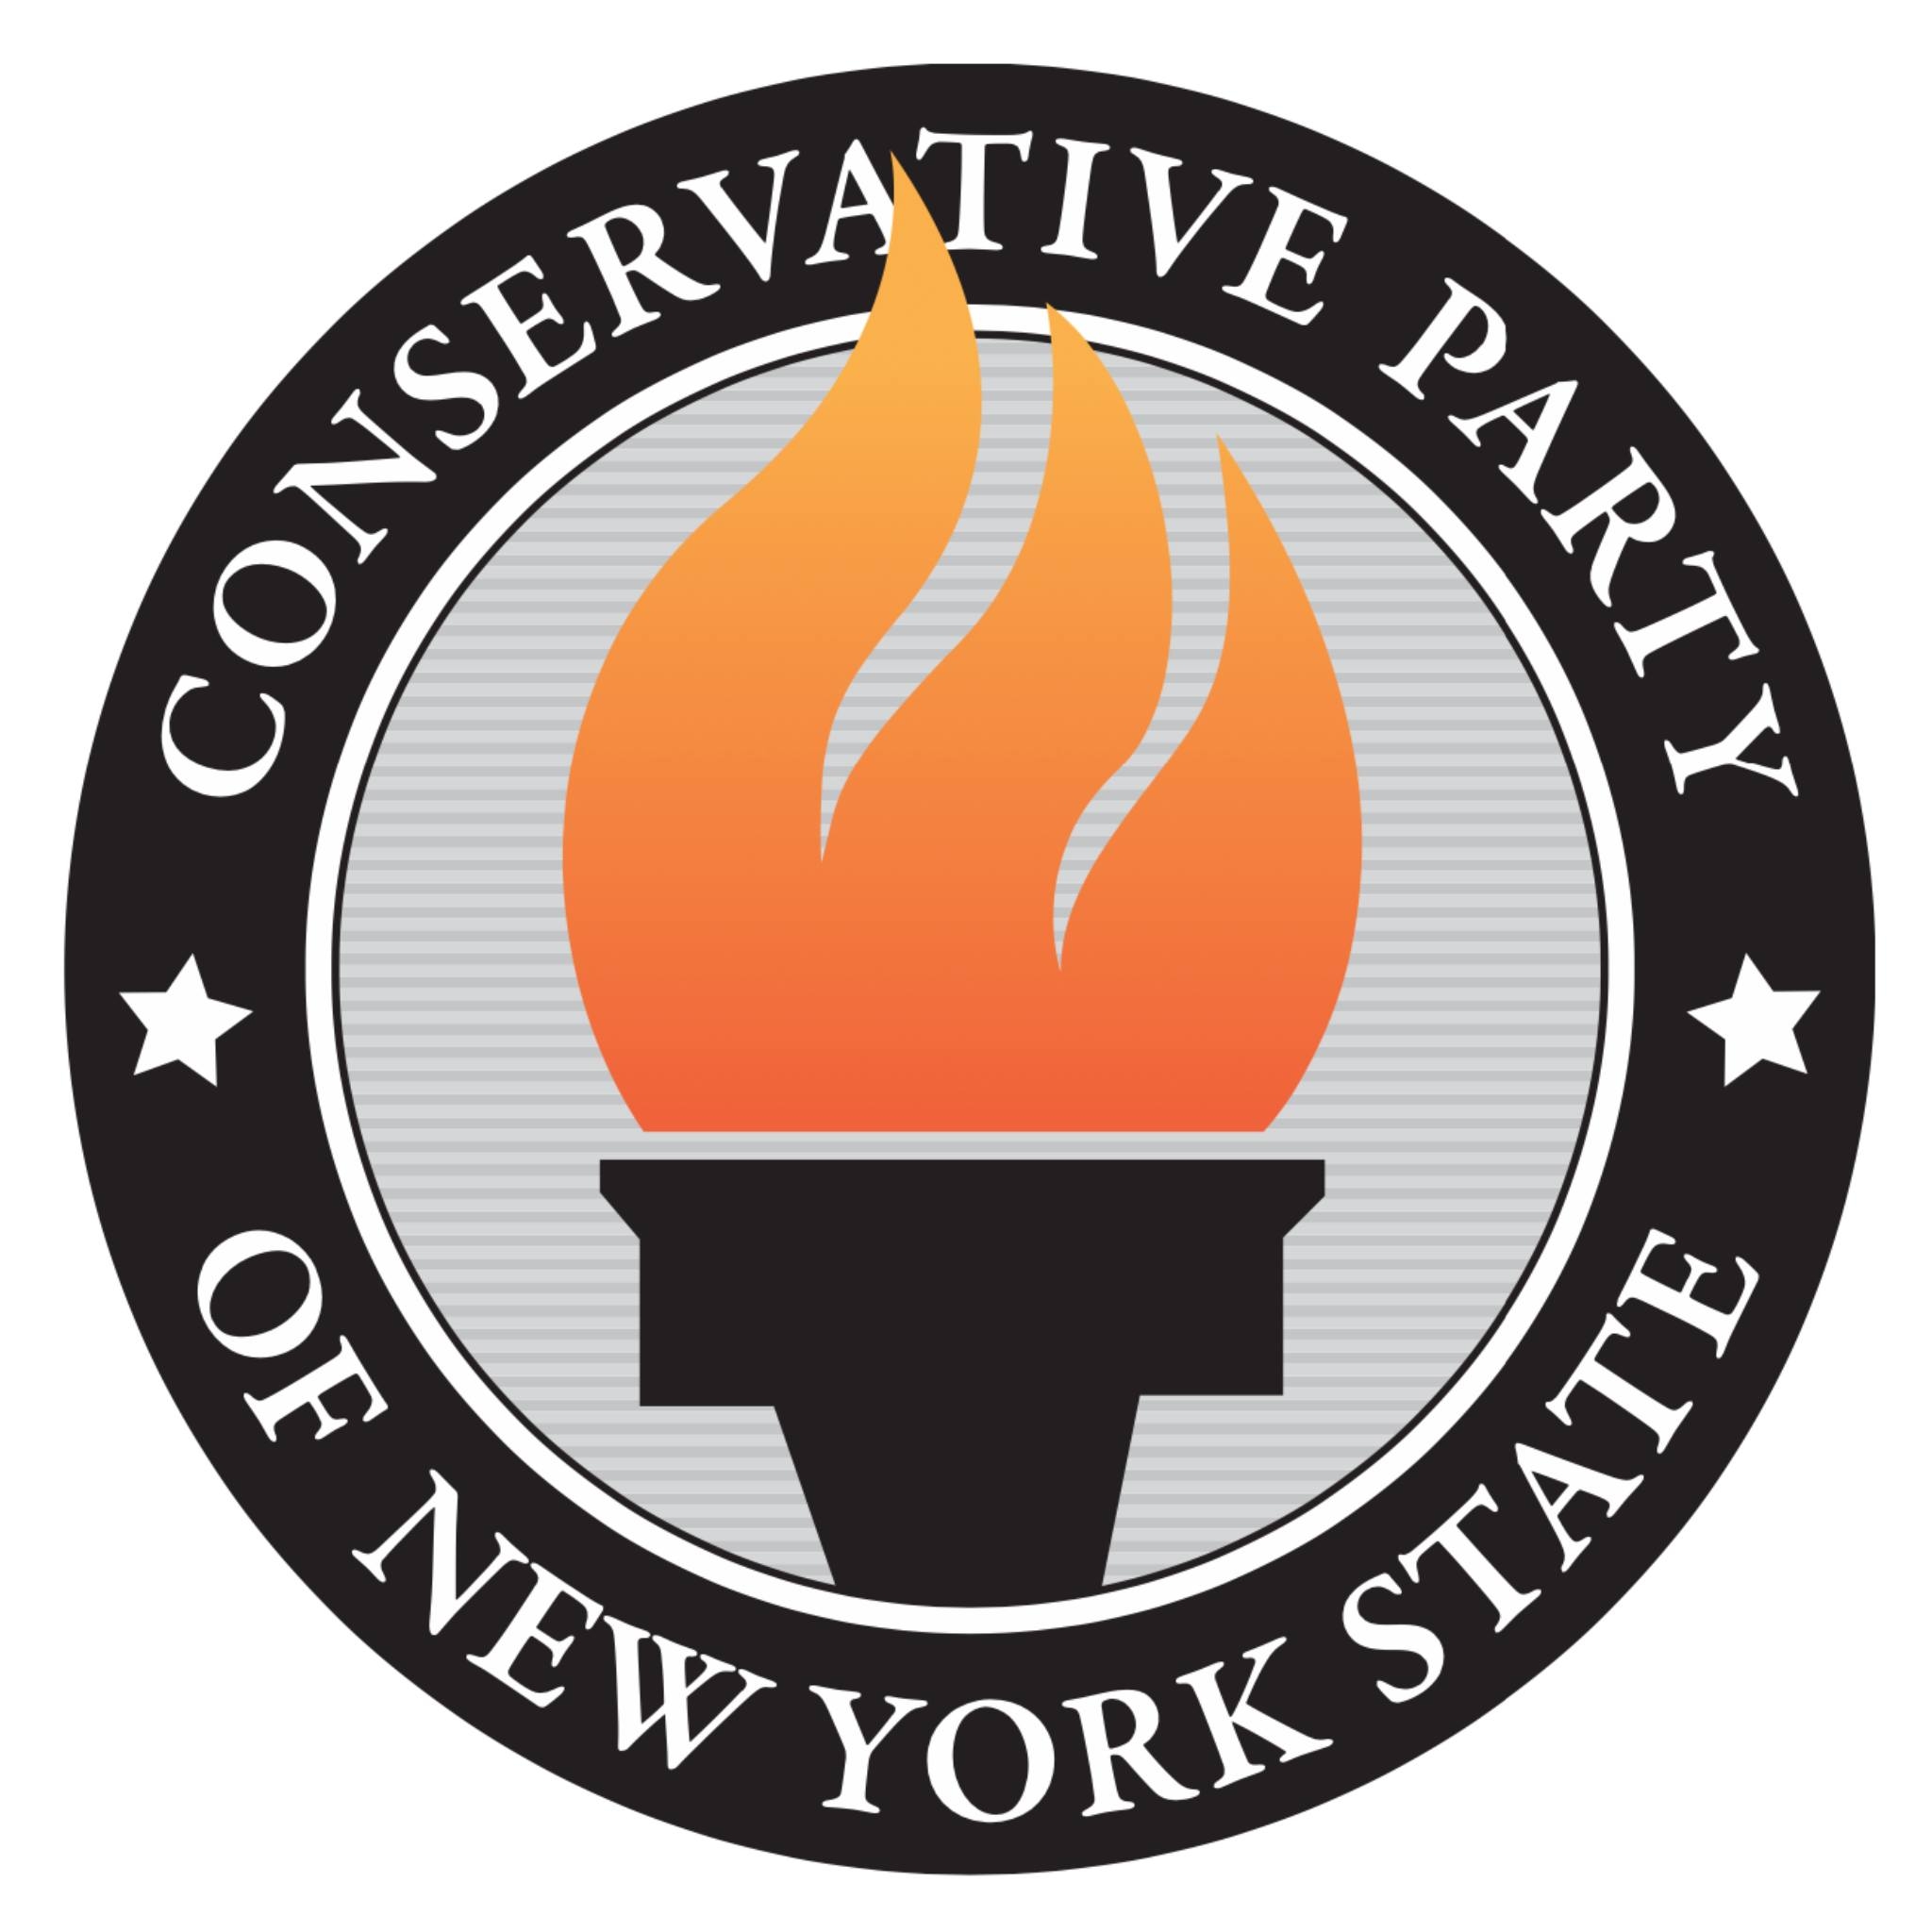 Conservative Party NYS Seal